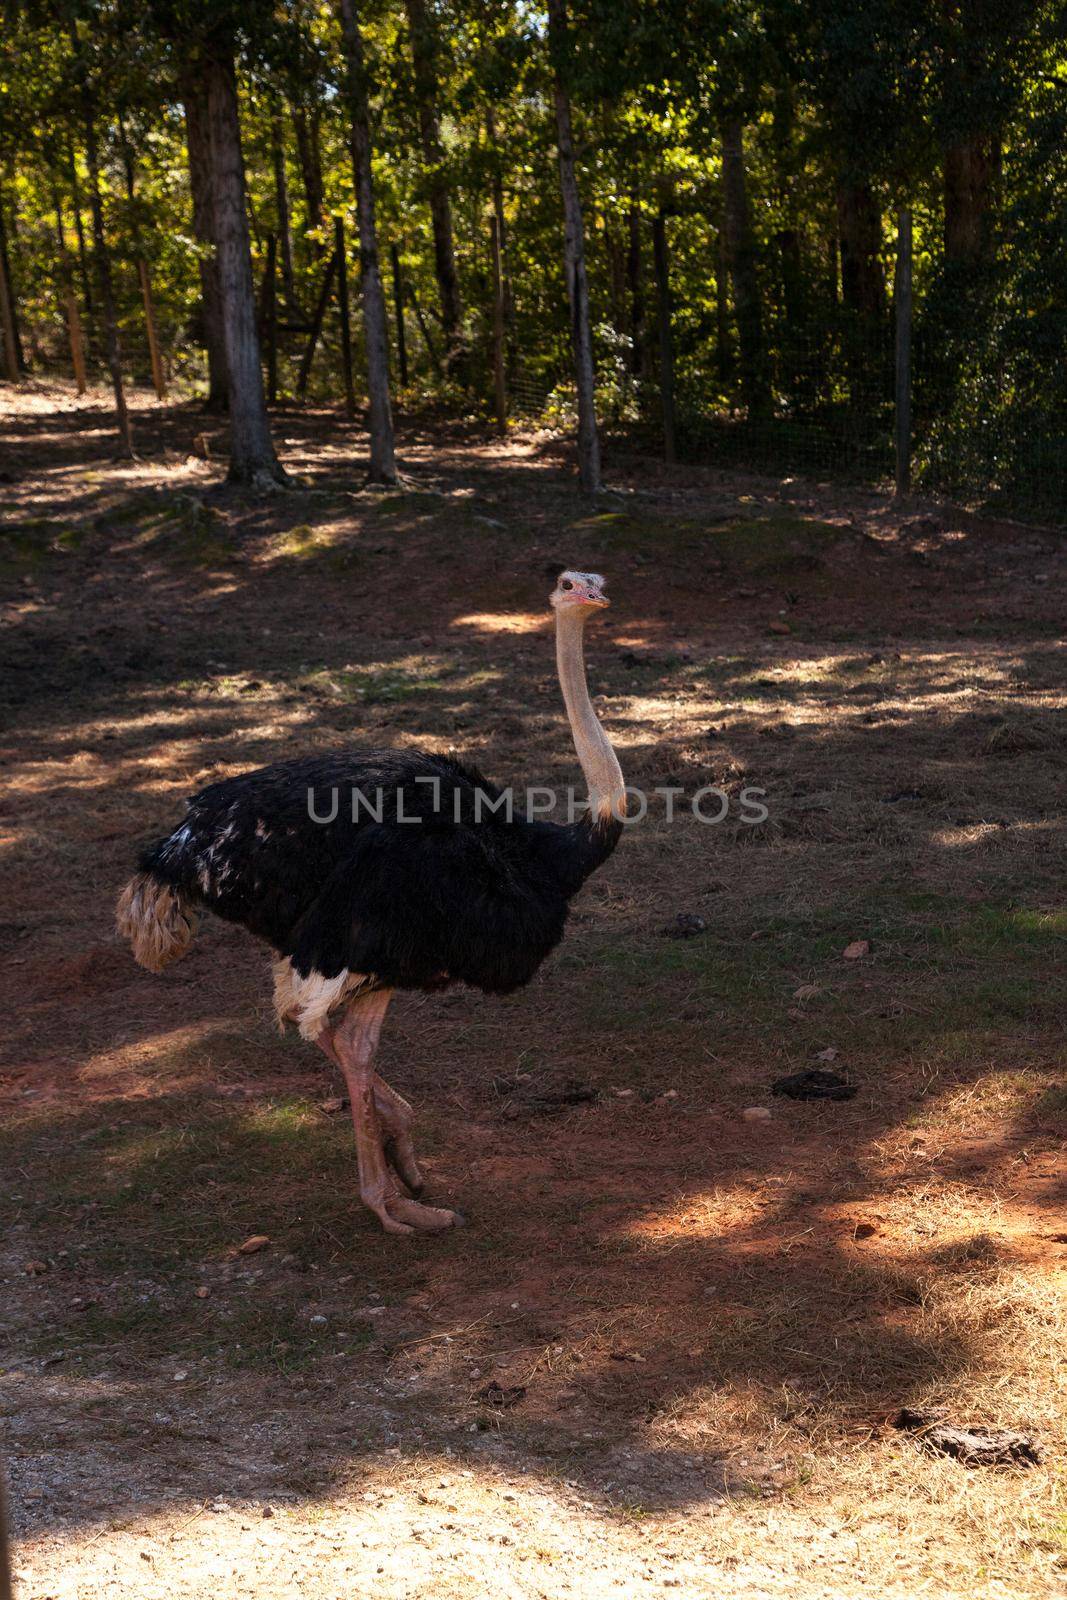 Ostrich is a large bird Struthio molybdophanes from Somalia